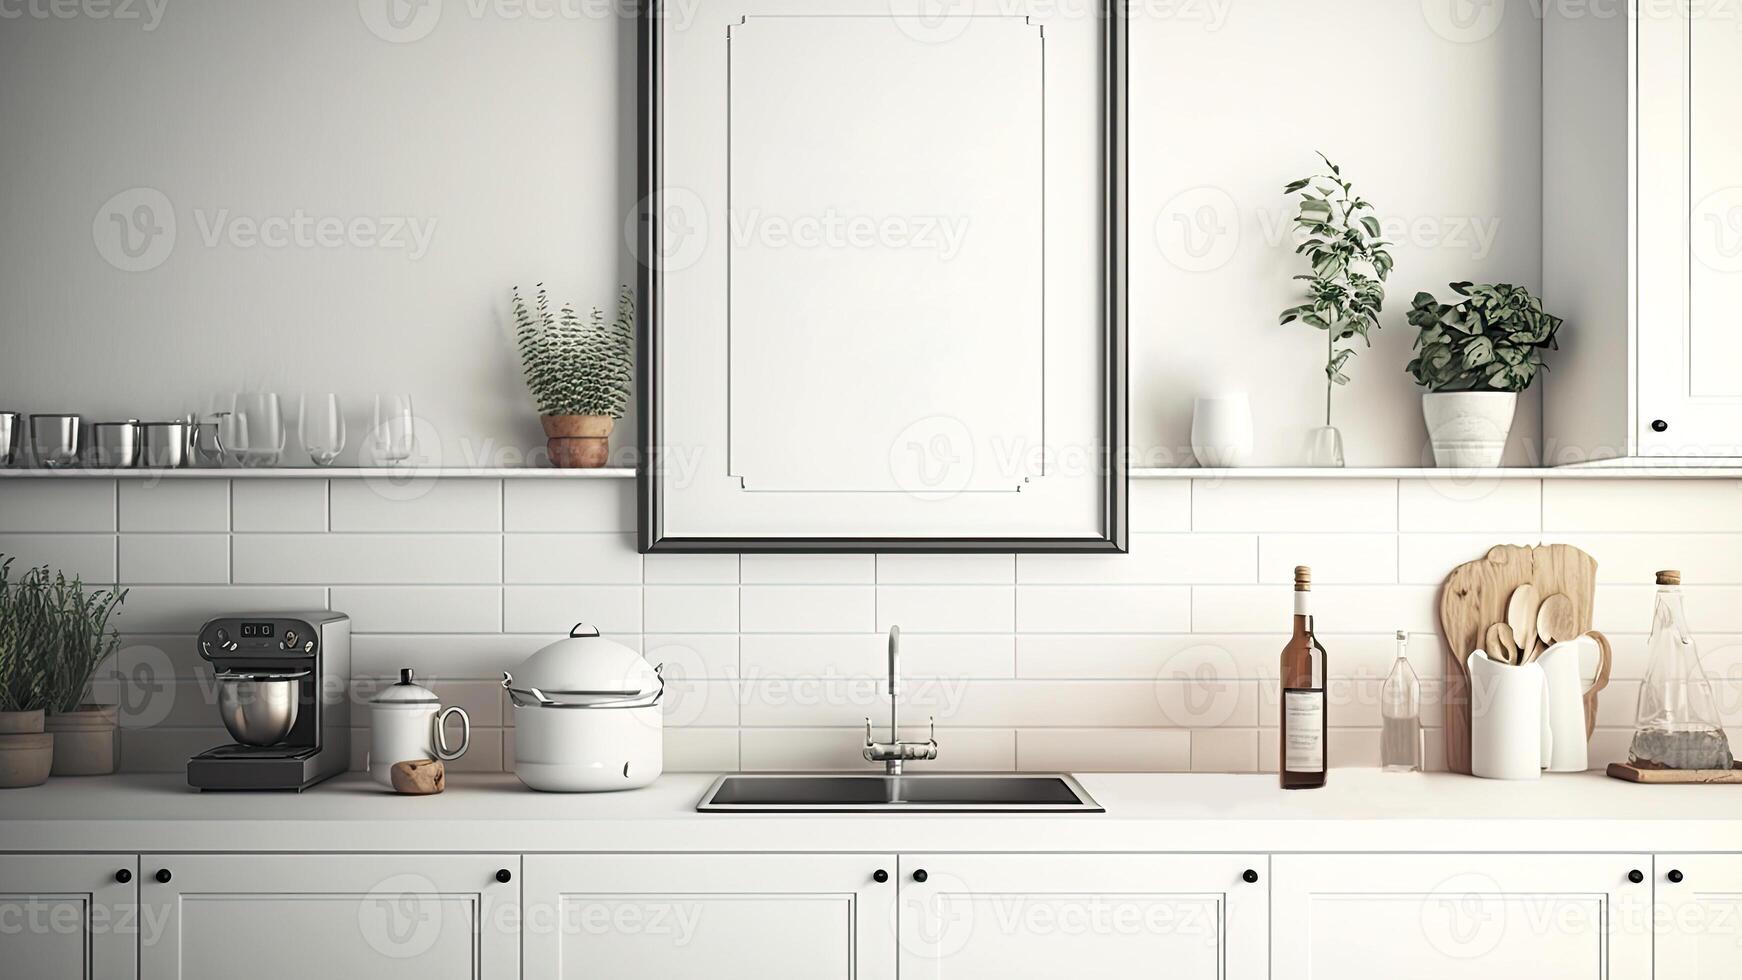 Luxurious, Modern Contemporary White Wall Kitchen, Minimalistic Design With Blank Photo Frame and a Vanity Cabinet. Digital Illustration.